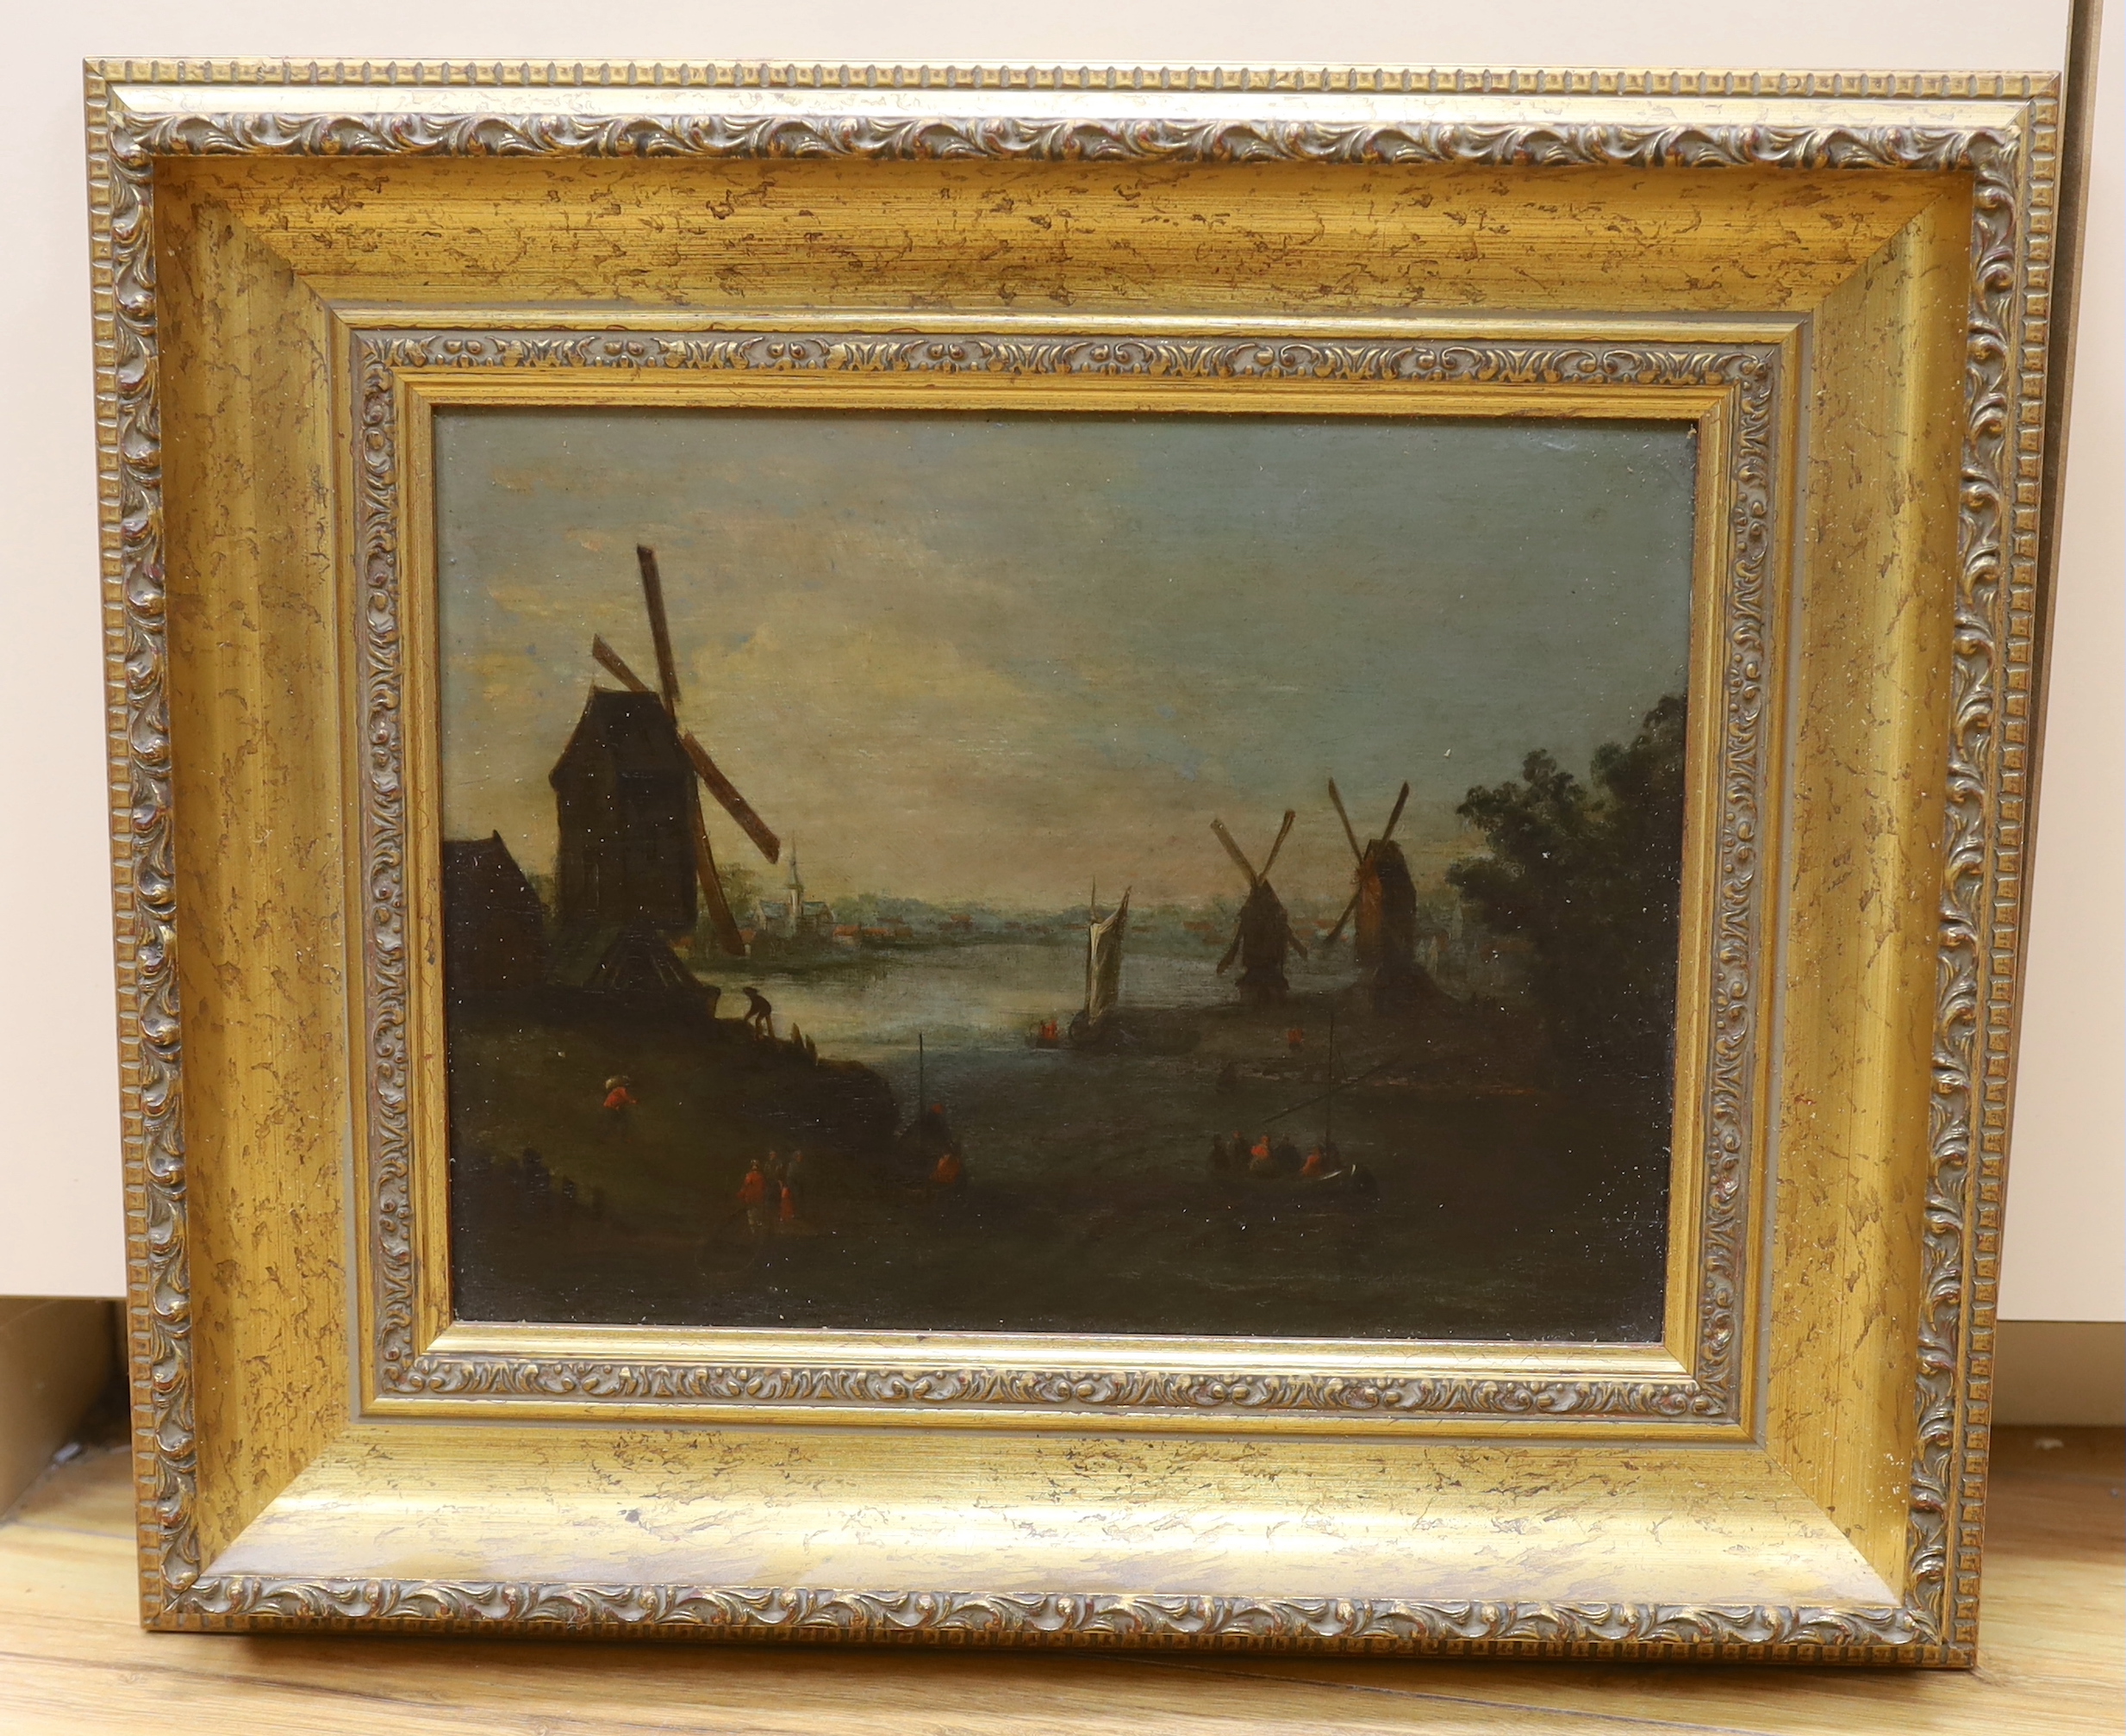 19th century Dutch school, oil on board, River landscape with boats and windmills, Croydon Galleries label verso, 28cm x 21cm